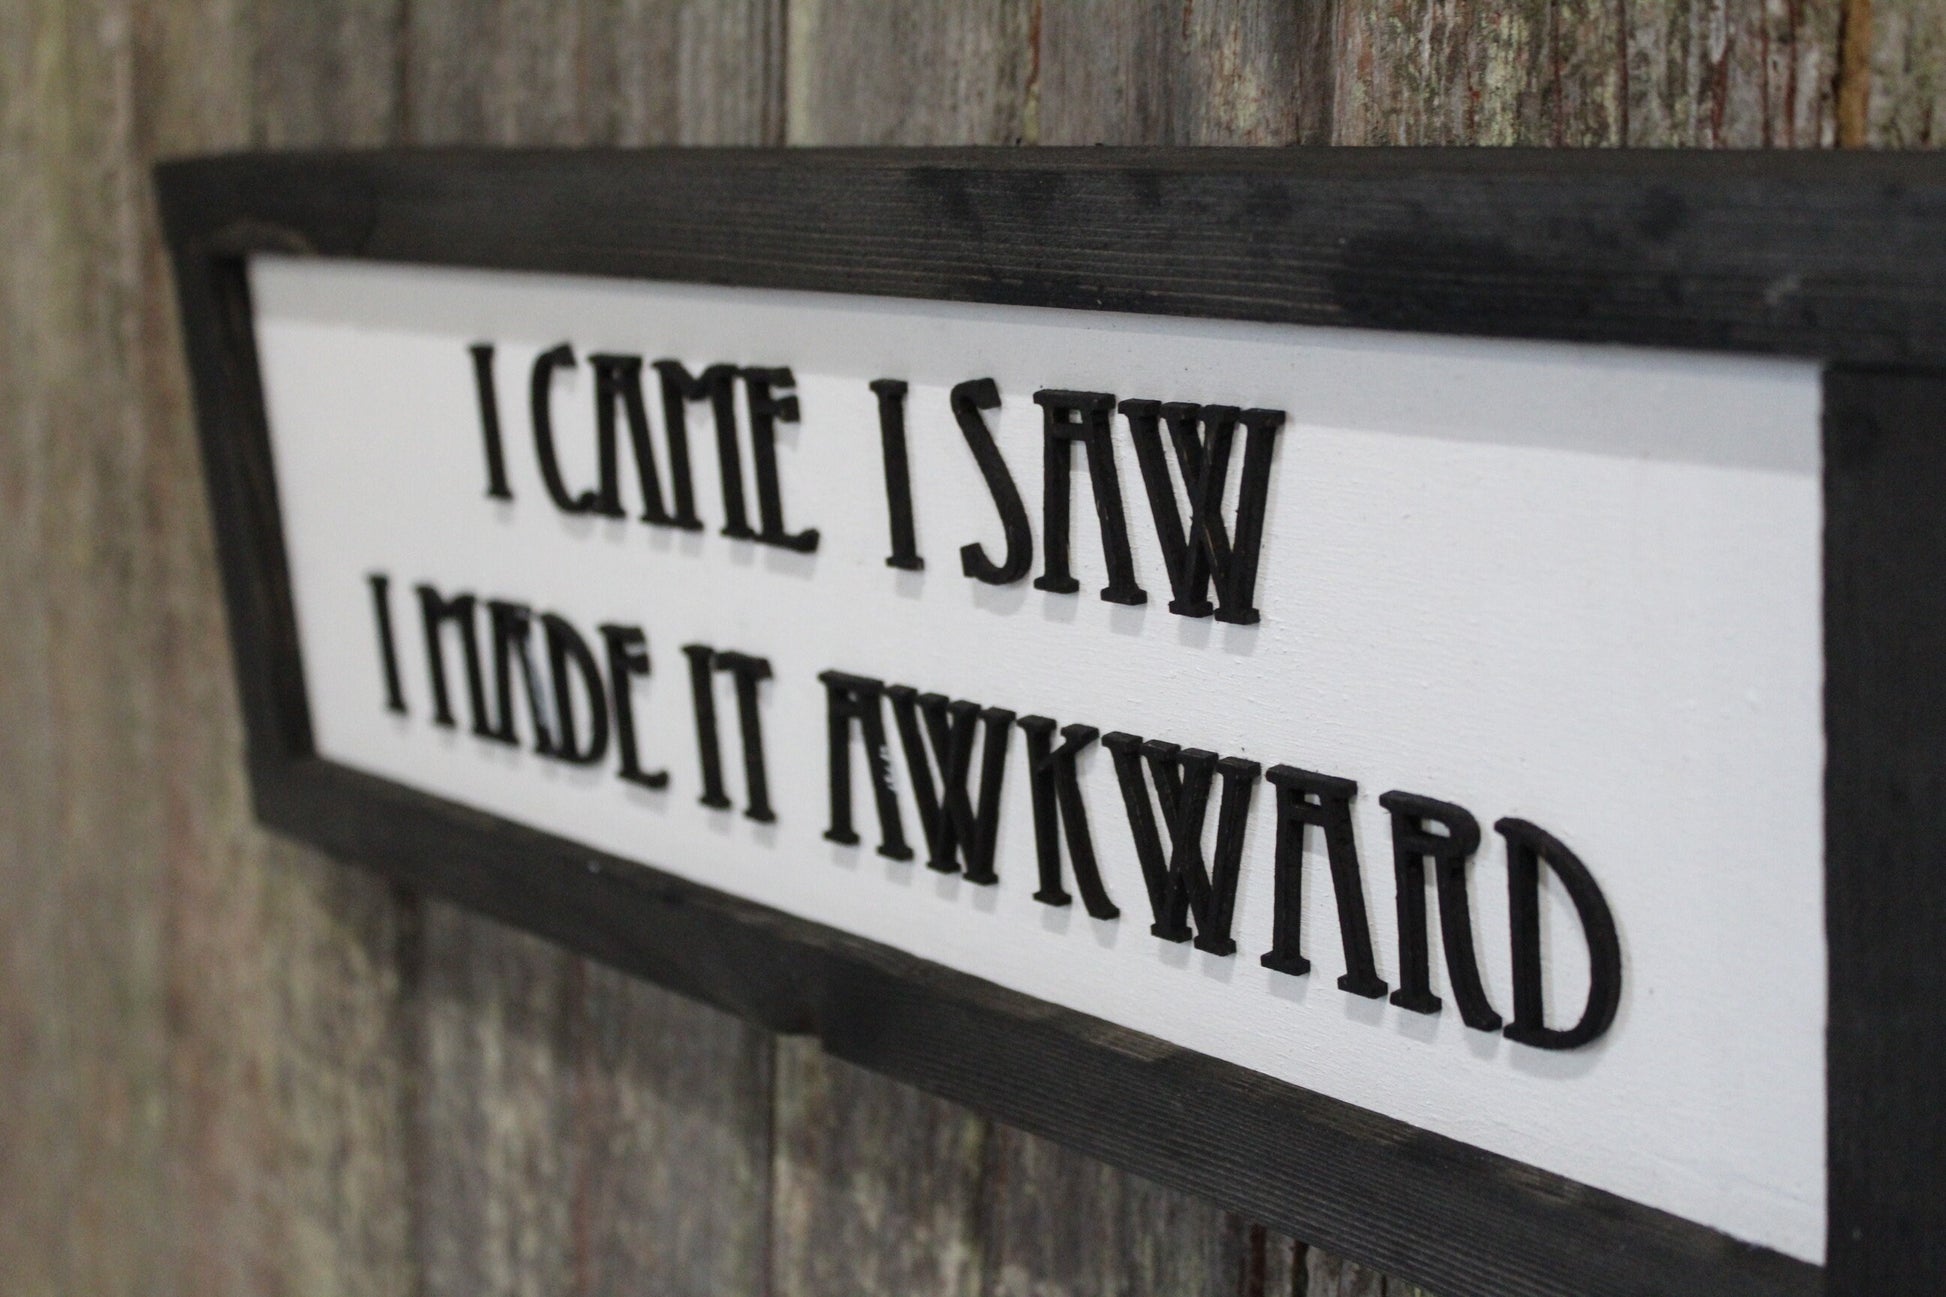 I Came I Saw I Made It Awkward Silly Wood Sign 3D Raised Text Comedic Gift Socially Awkward Introvert Rustic Handmade Farmhouse Sign